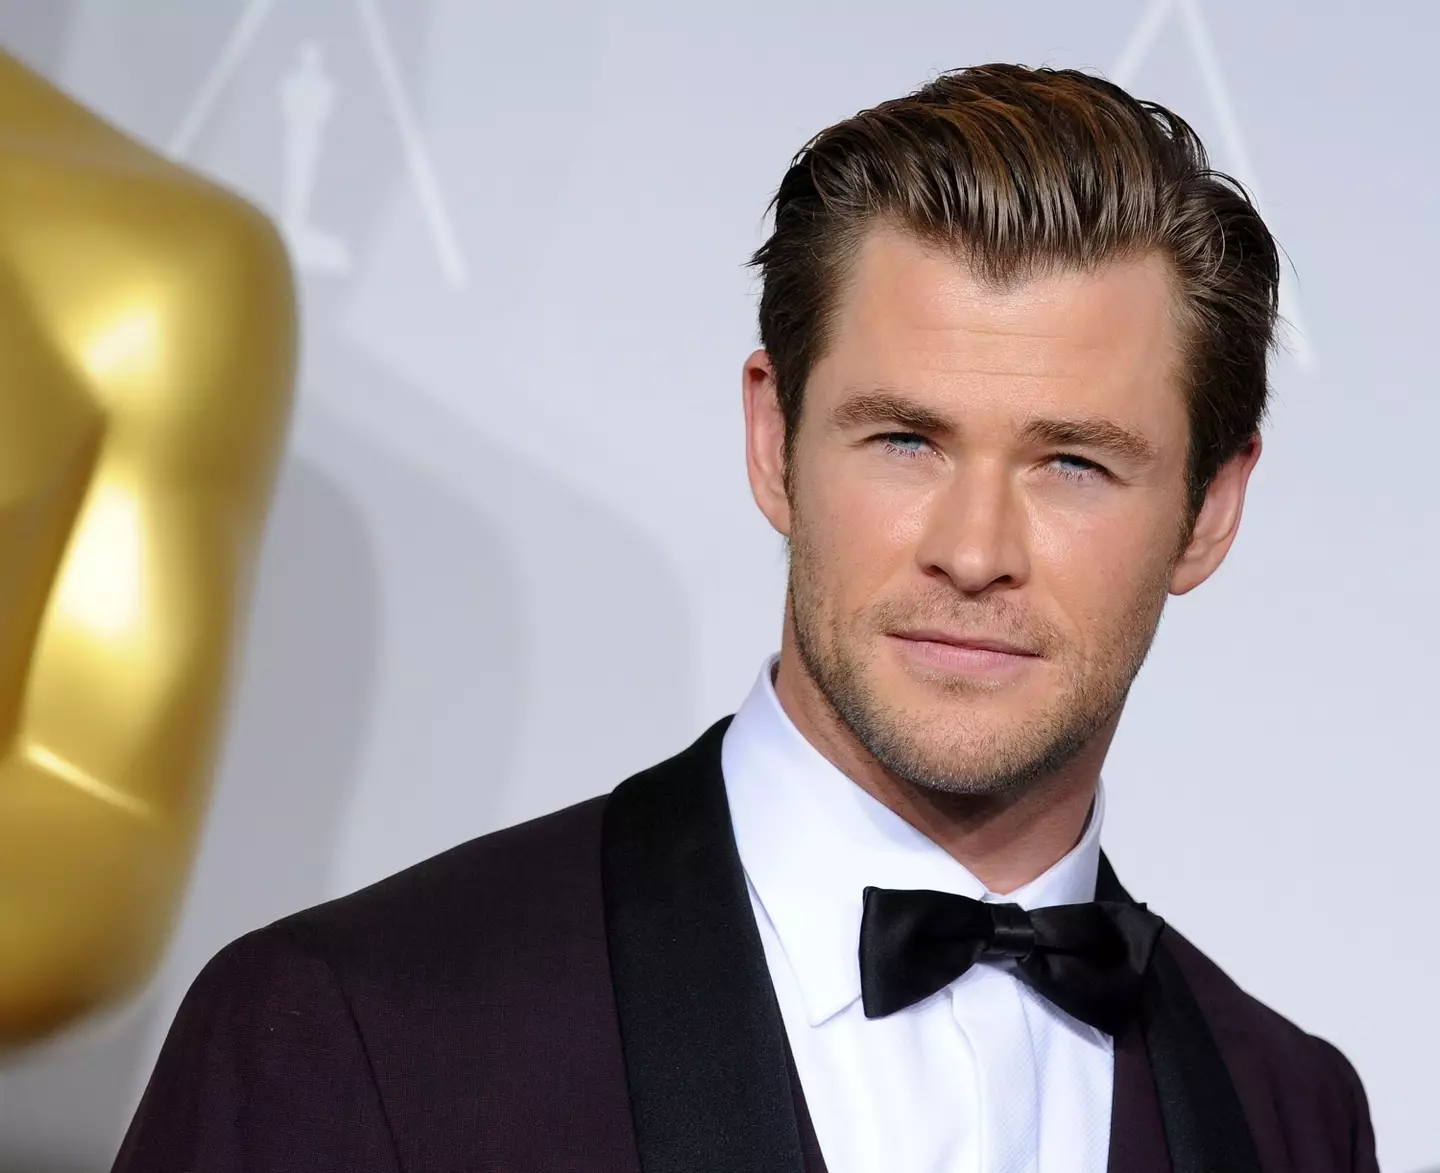 Chris Hemsworth revealed discovered he is more likely to develop Alzheimer's in his new show.